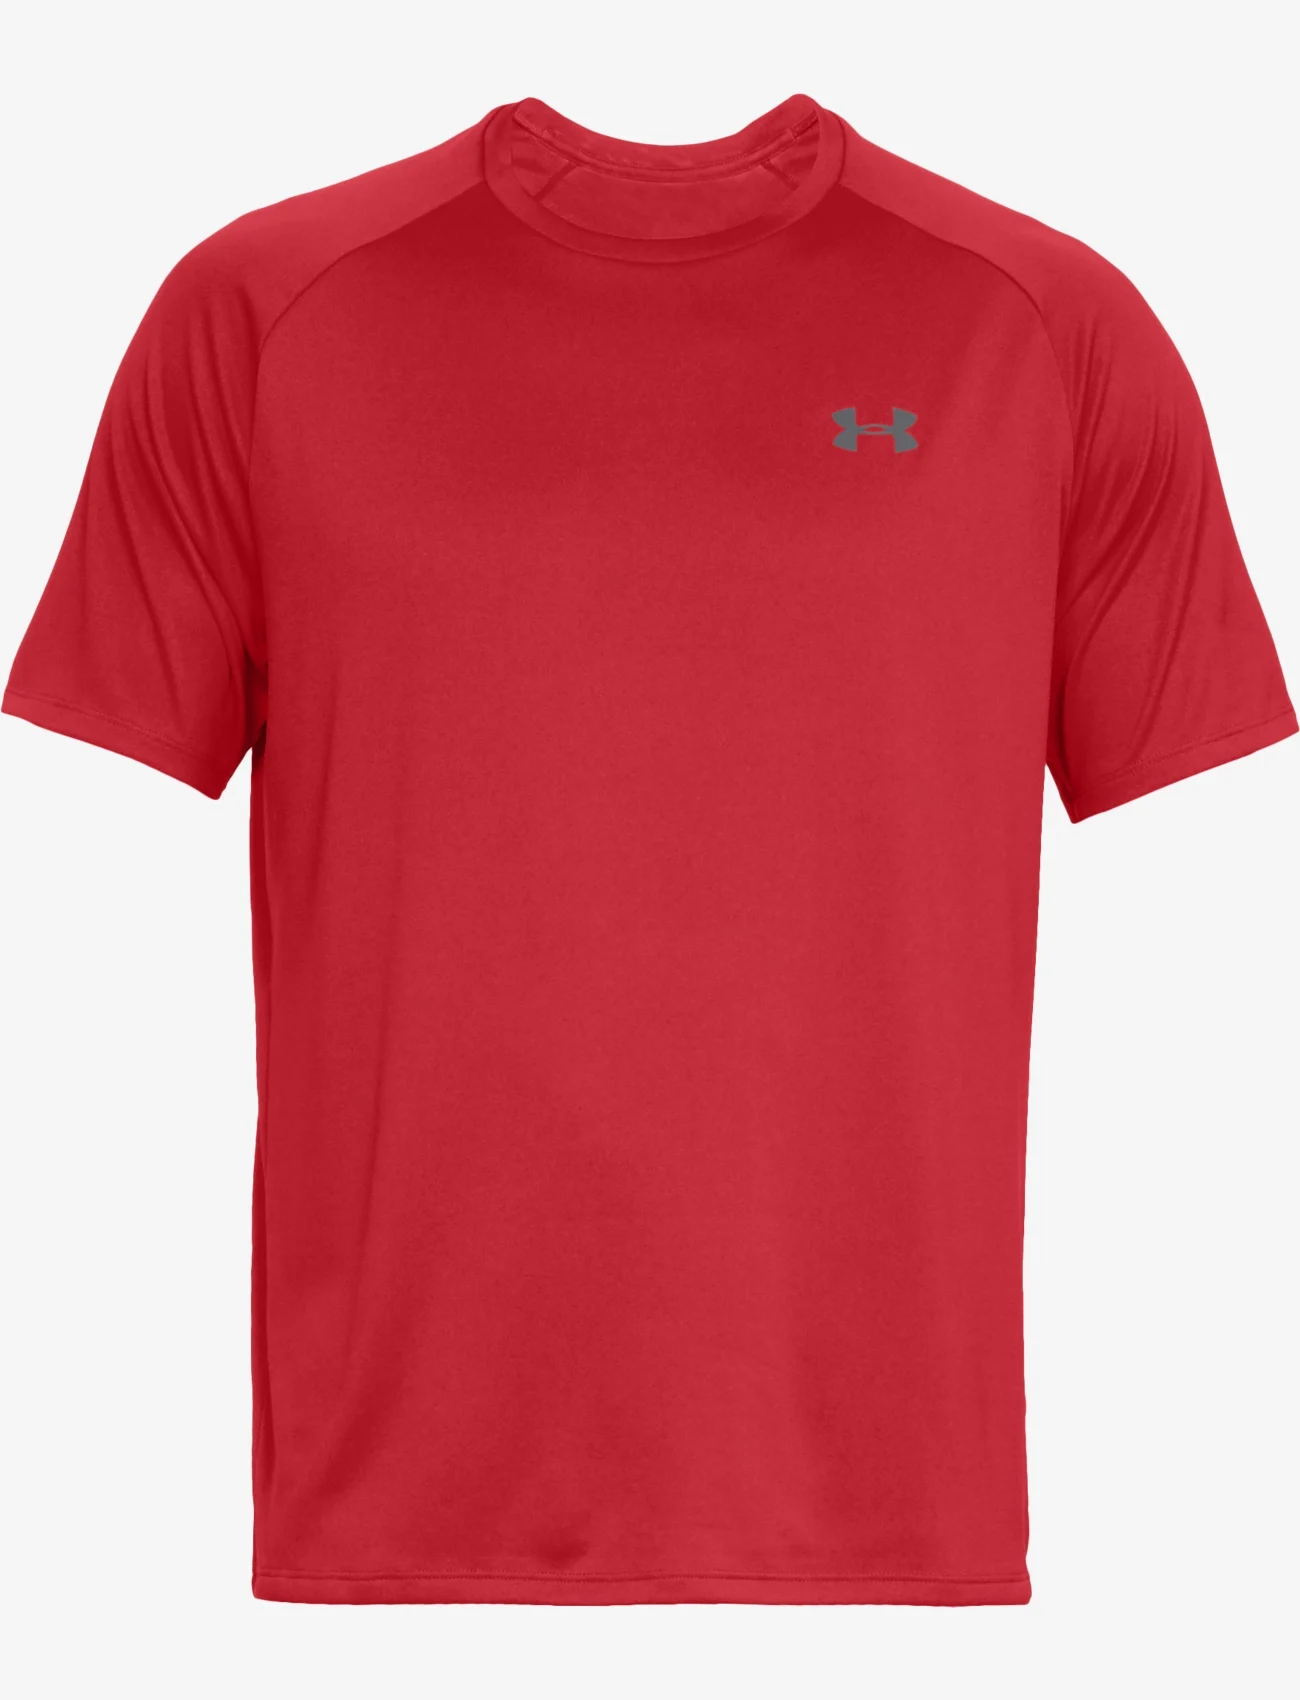 Under Armour - UA Tech 2.0 SS Tee - t-shirts - red - 1